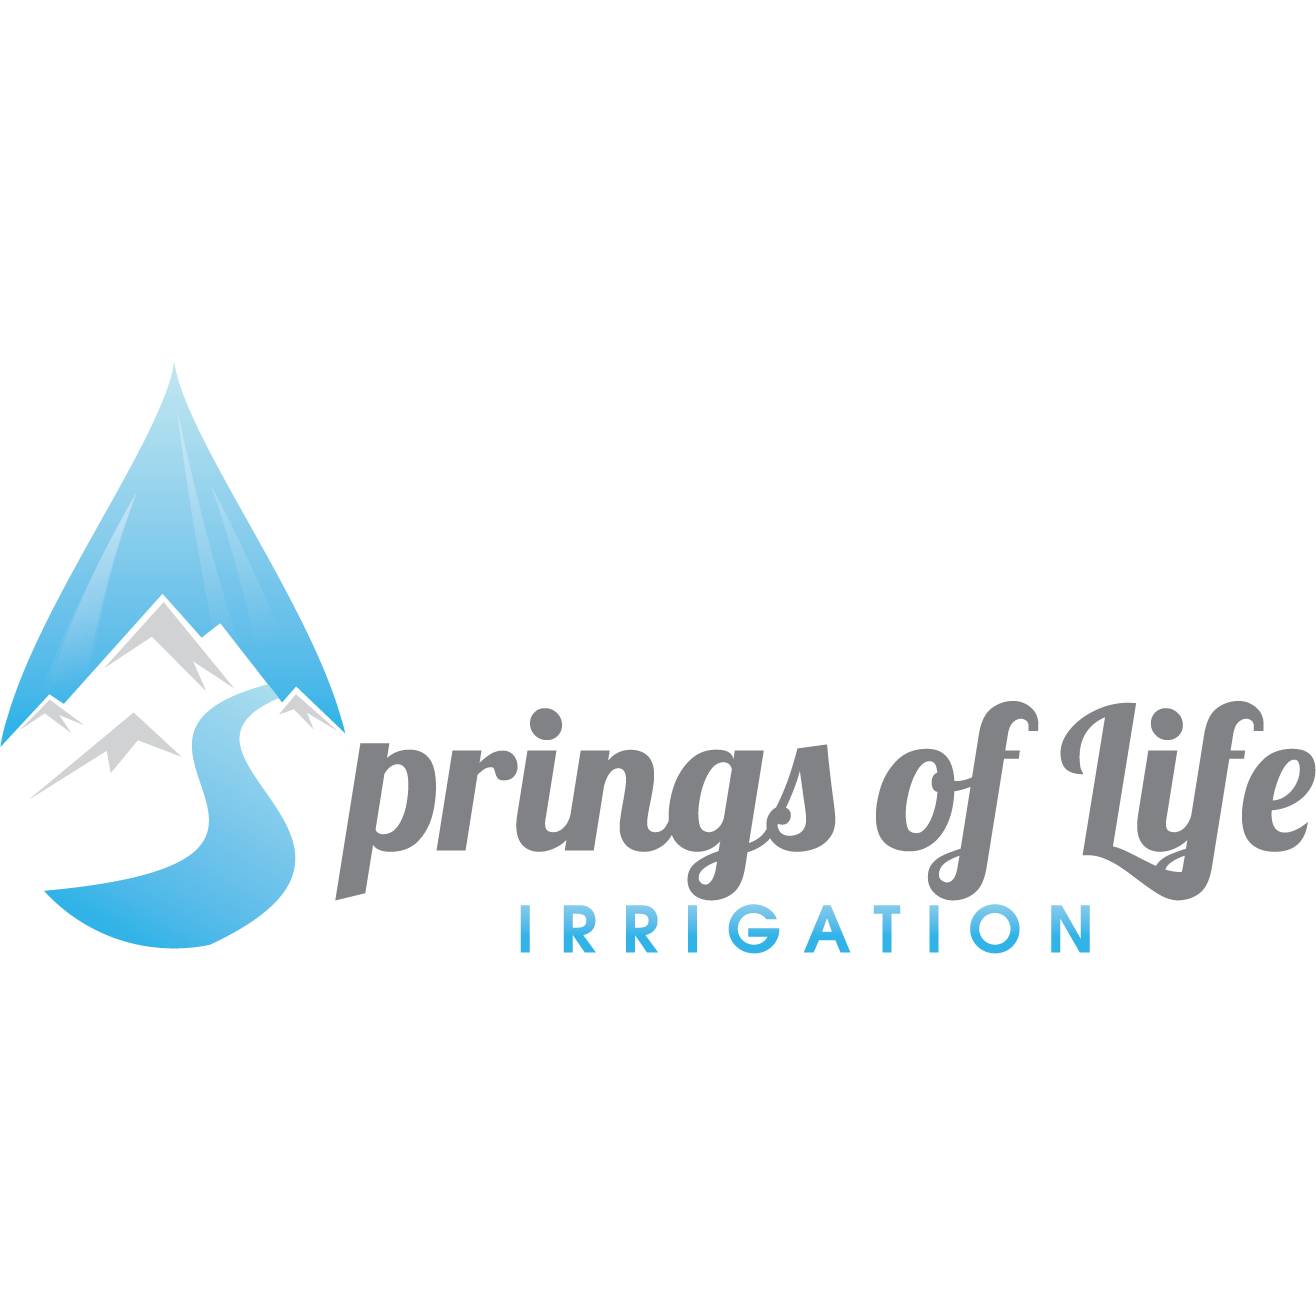 Springs of life Irrigation